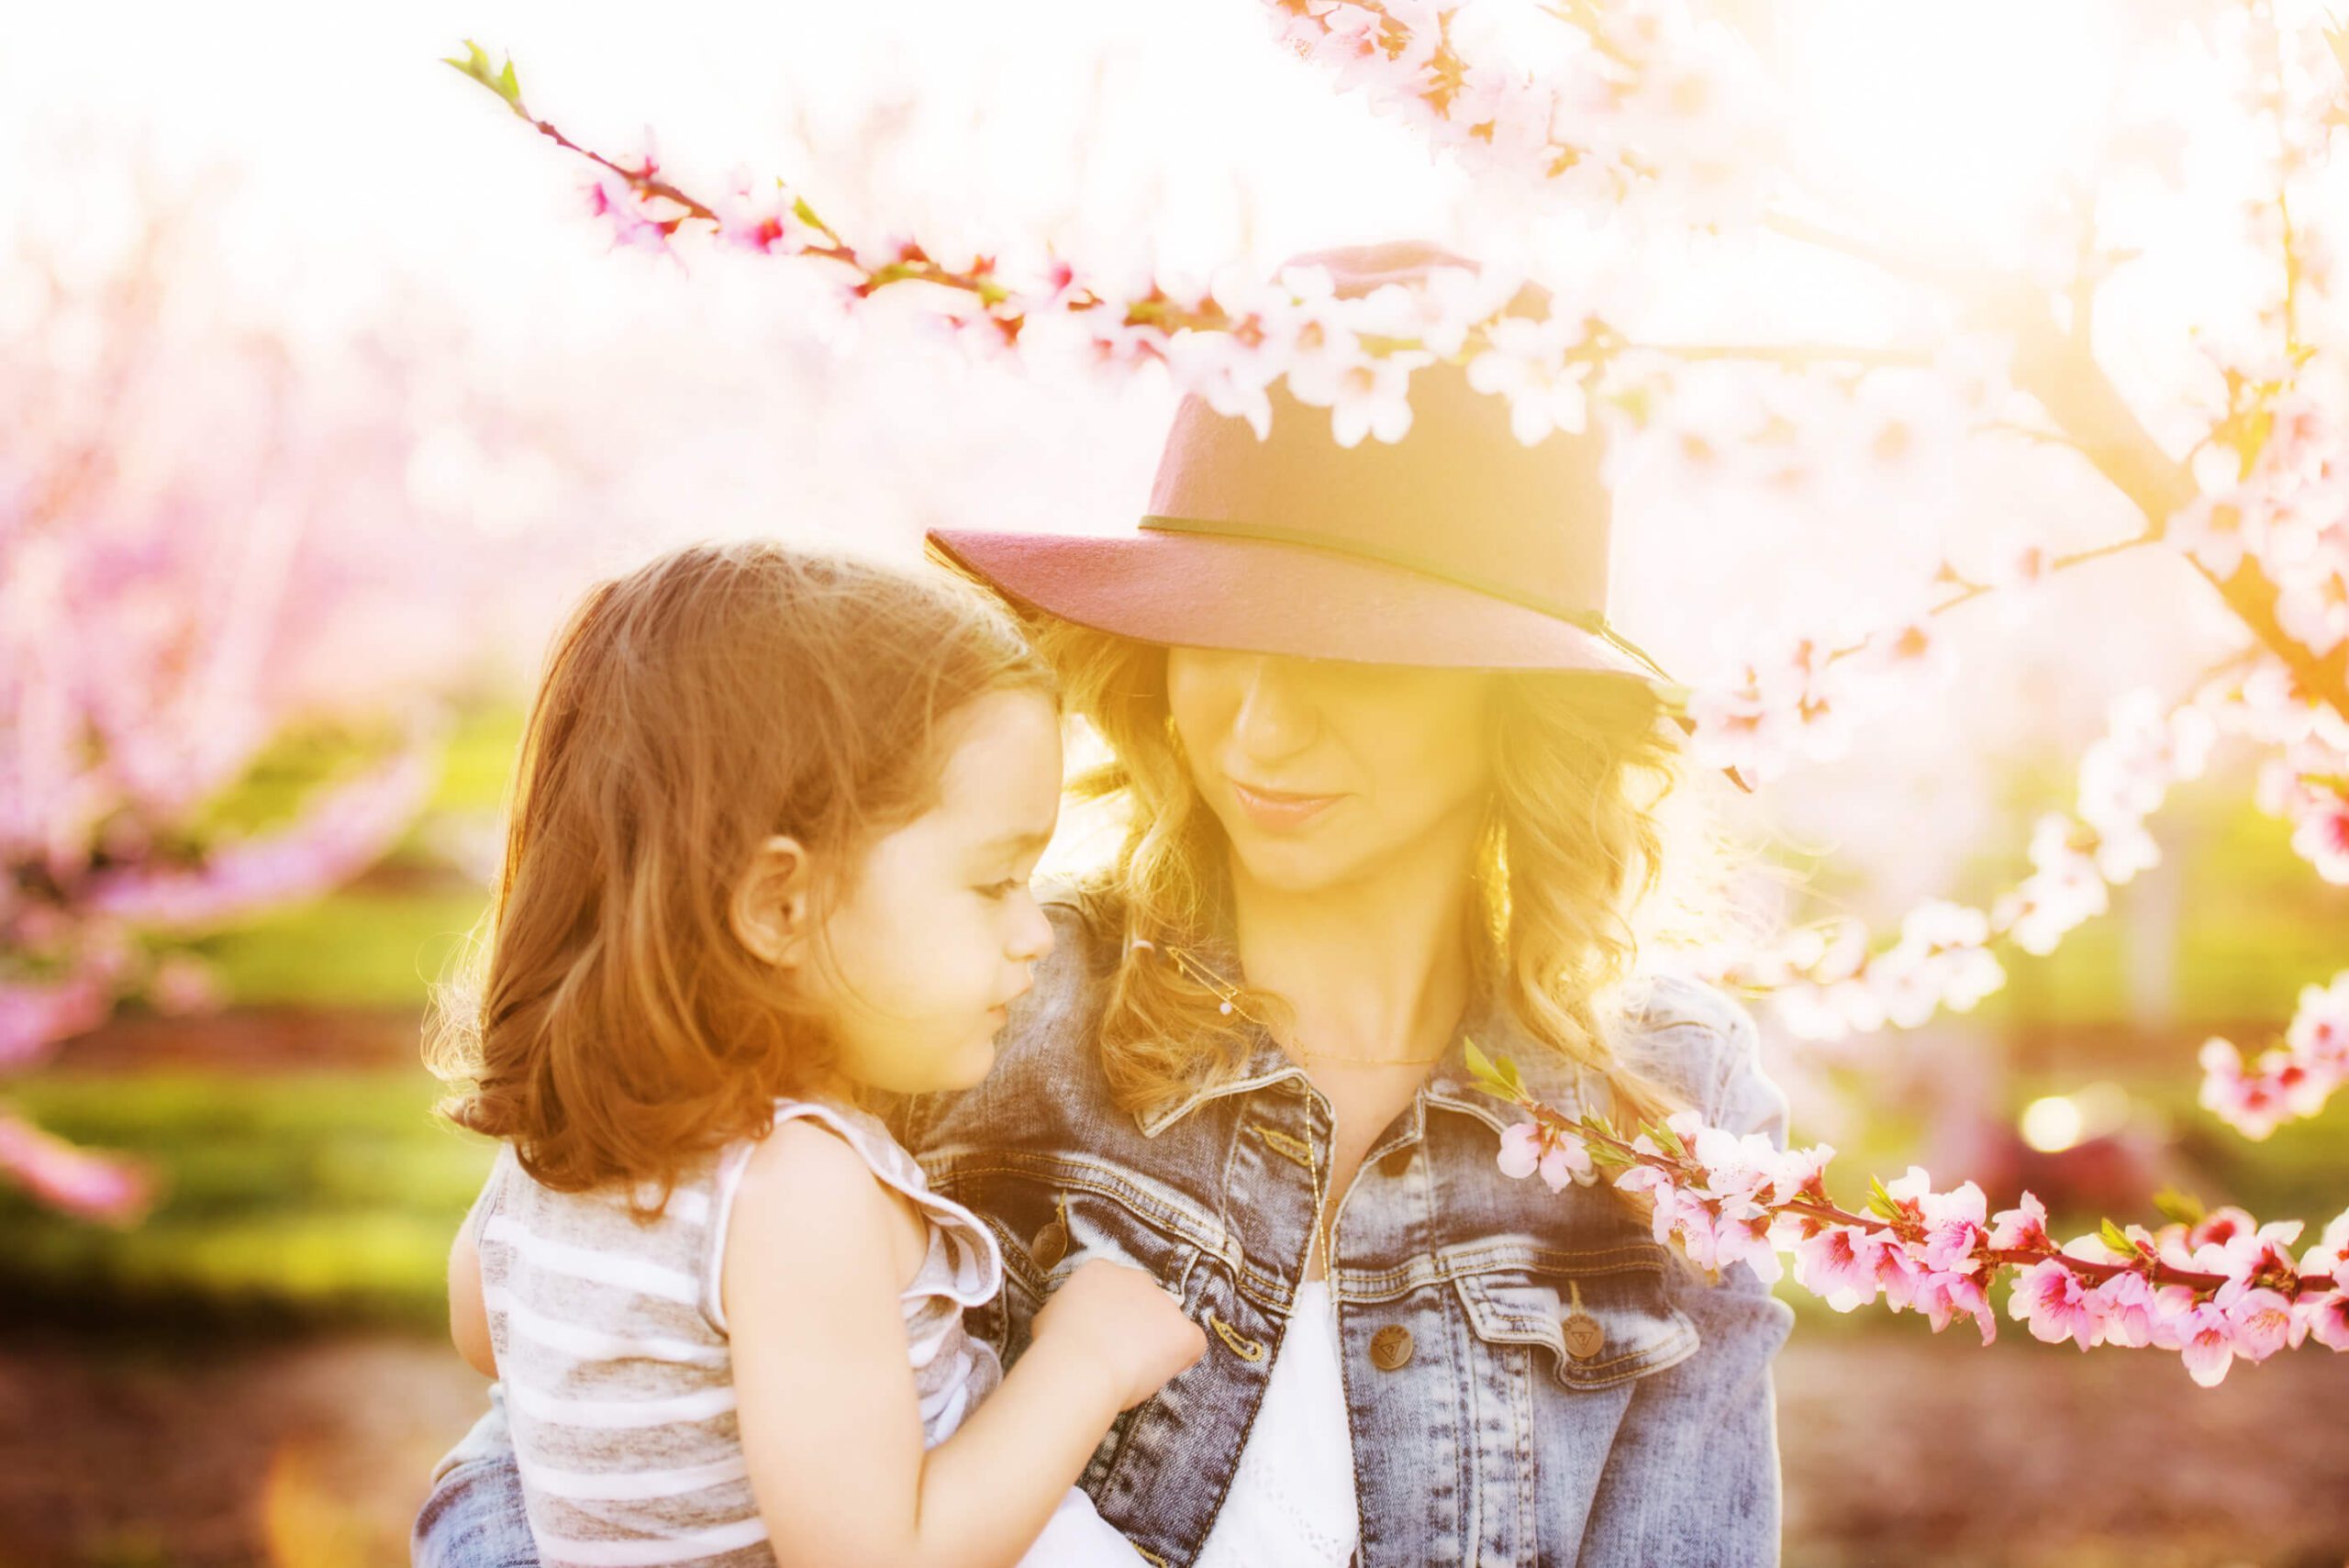 Mom hold her daughter wearing a fushia hat with the golden light shining from behind on both of them.